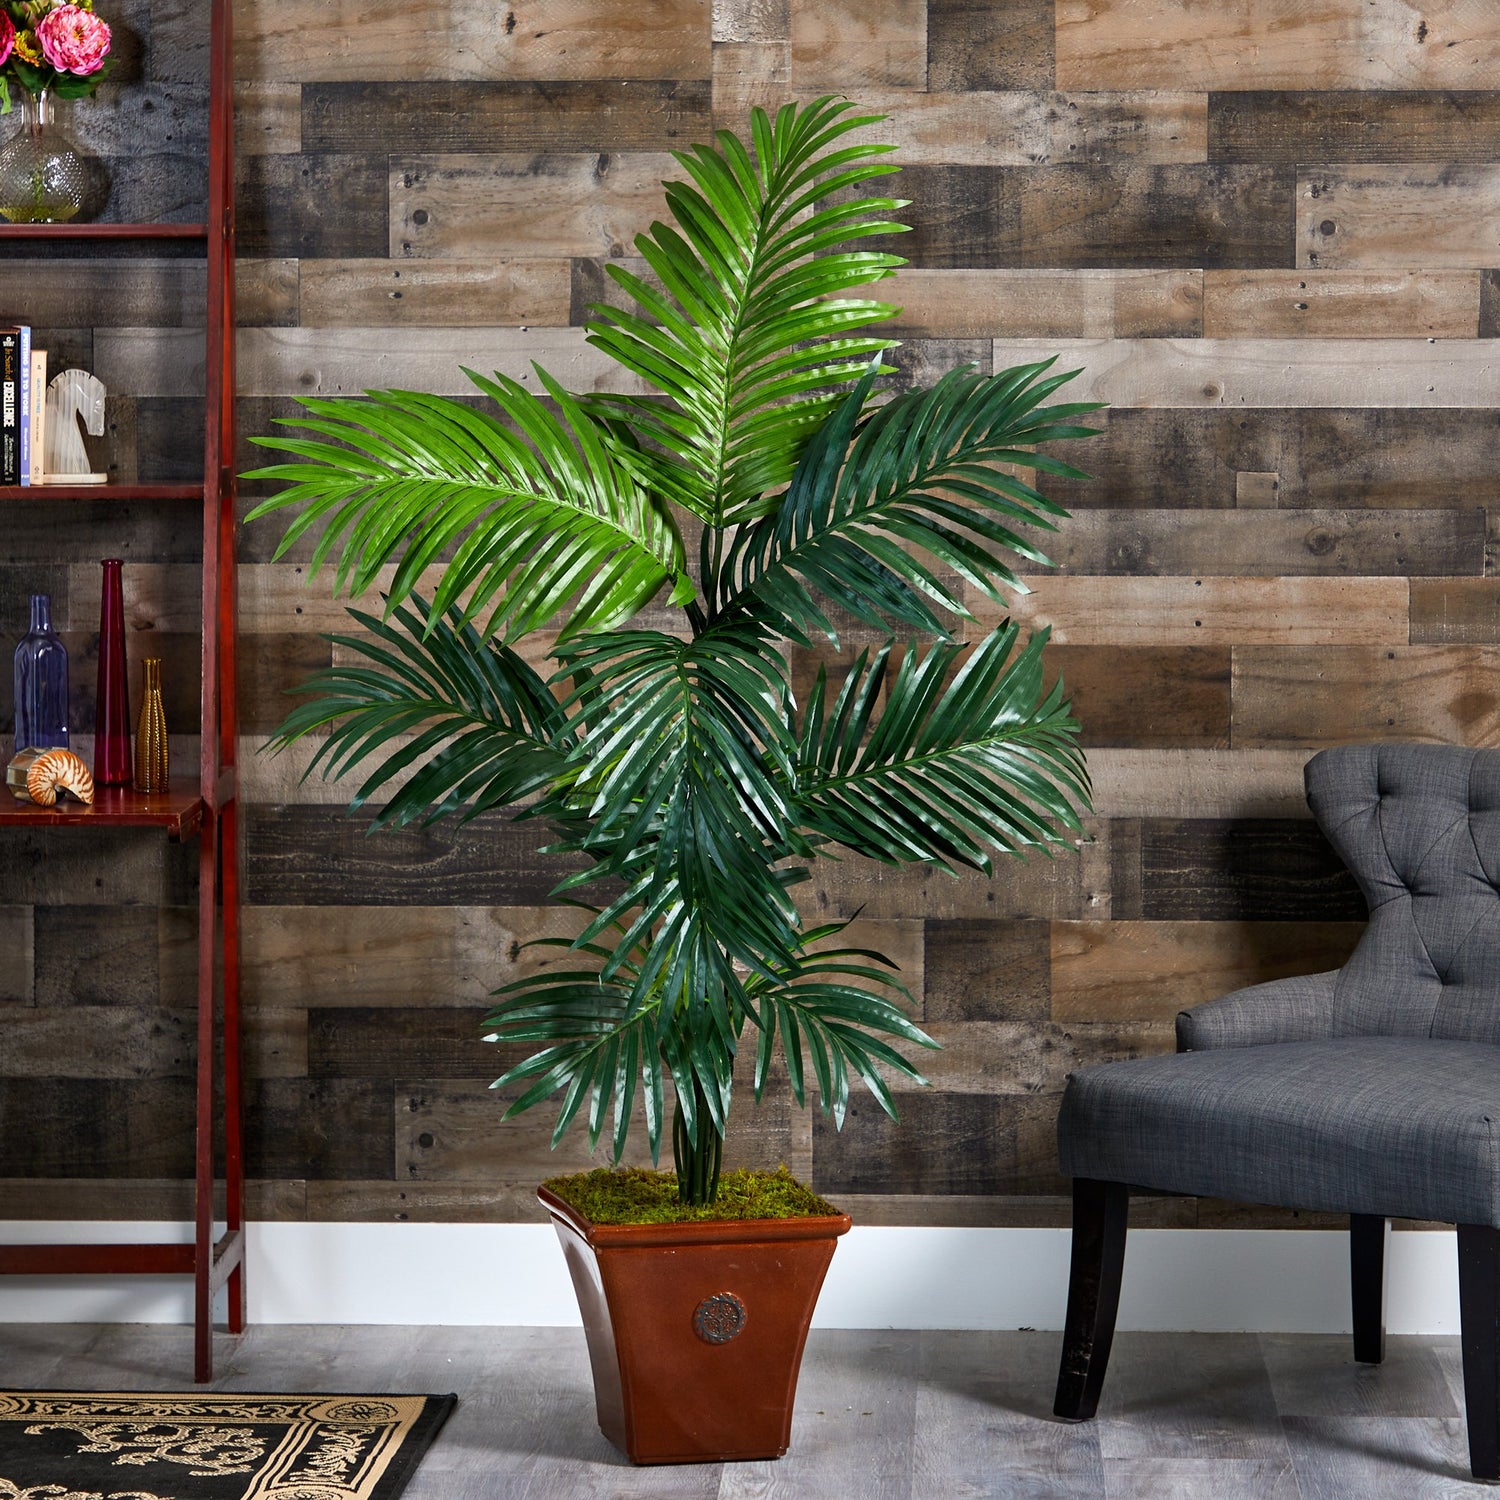 5’ Kentia Artificial Palm Tree in Brown Planter